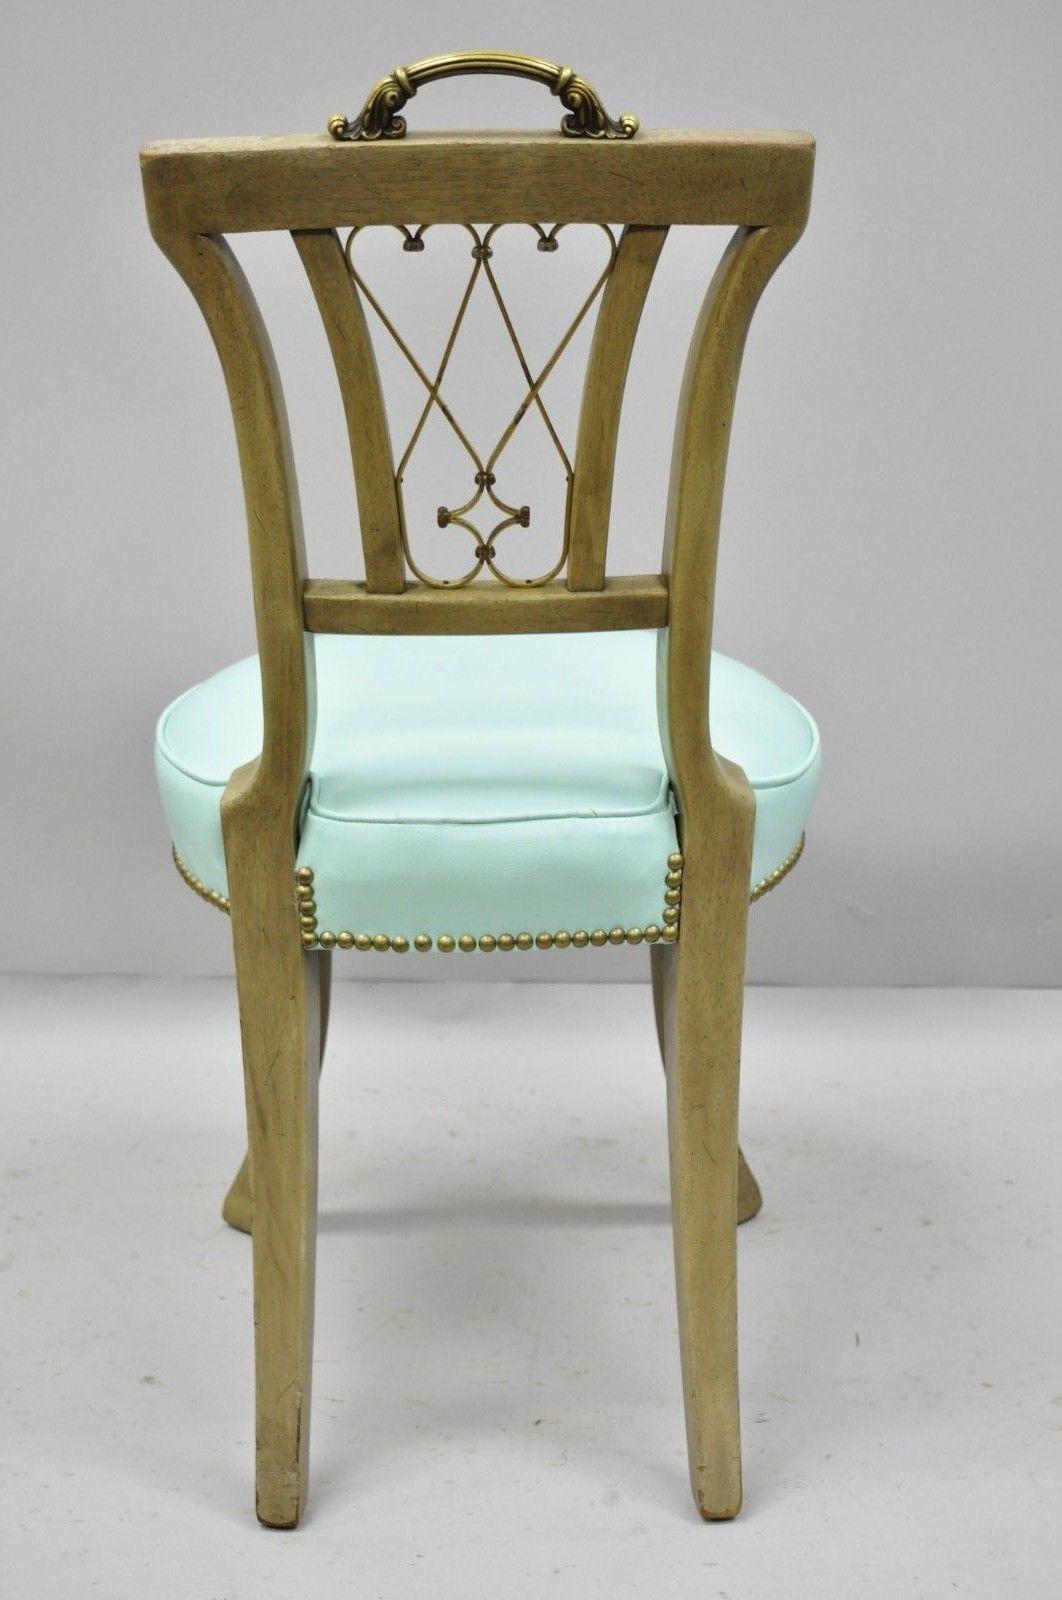 Carved Mahogany Regency Style Chair with Brass Handle and Aqua Blue Vinyl 'B' For Sale 1